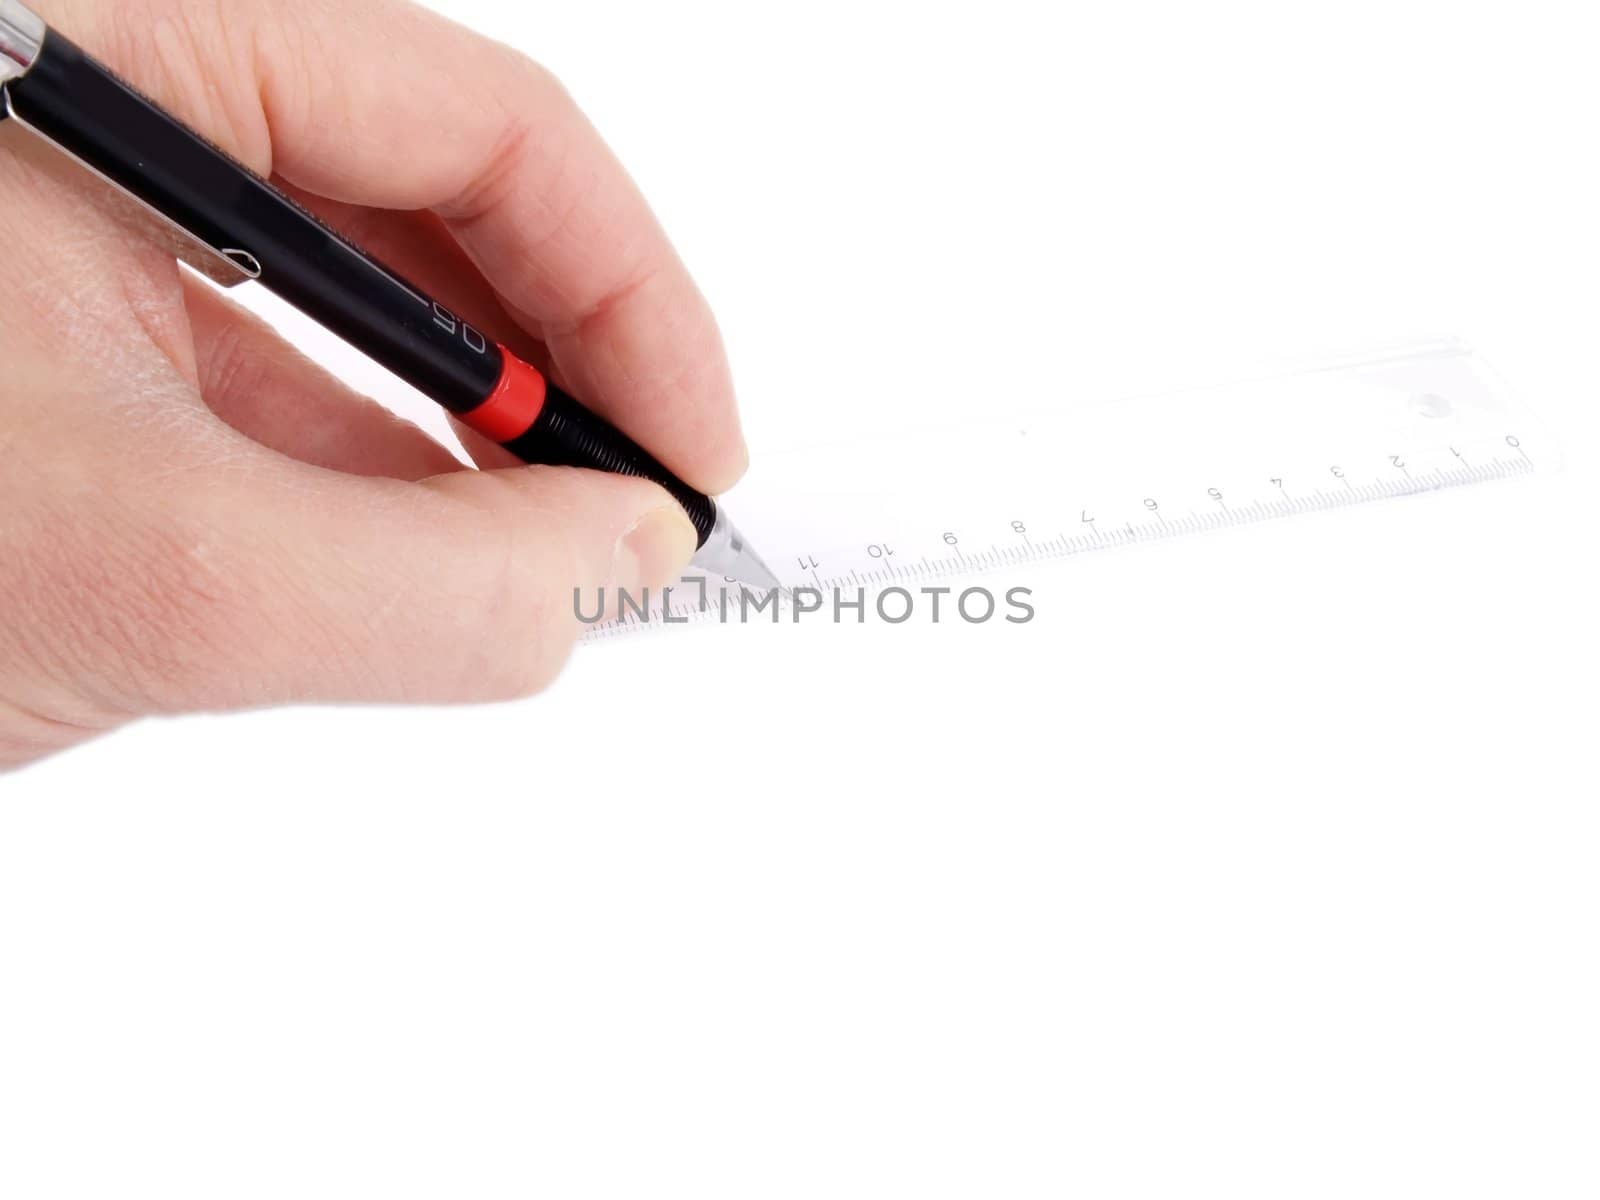 Someone drawing a straight line, with a pencil against a ruler on white paper